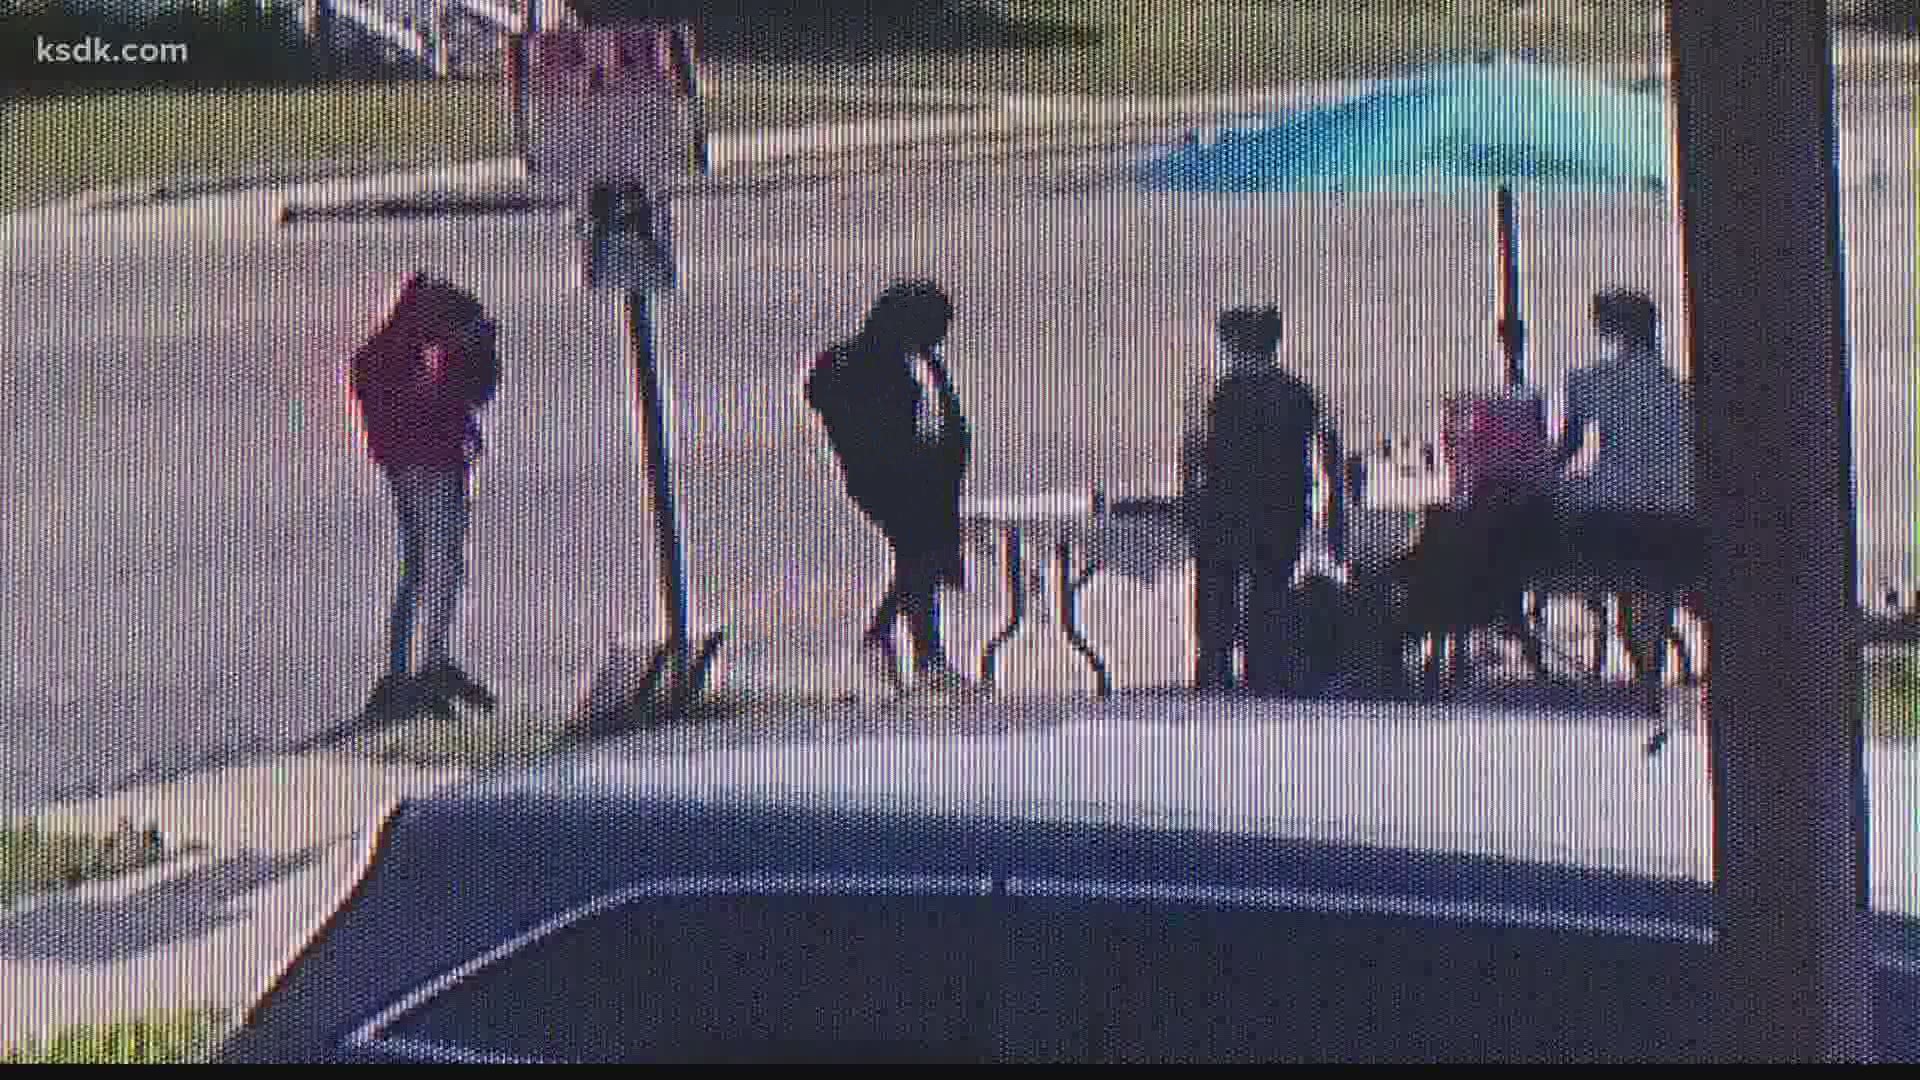 Two 13-year-old boys running a lemonade stand were robbed at gunpoint. Surveillance video shows what appears to be a gun.